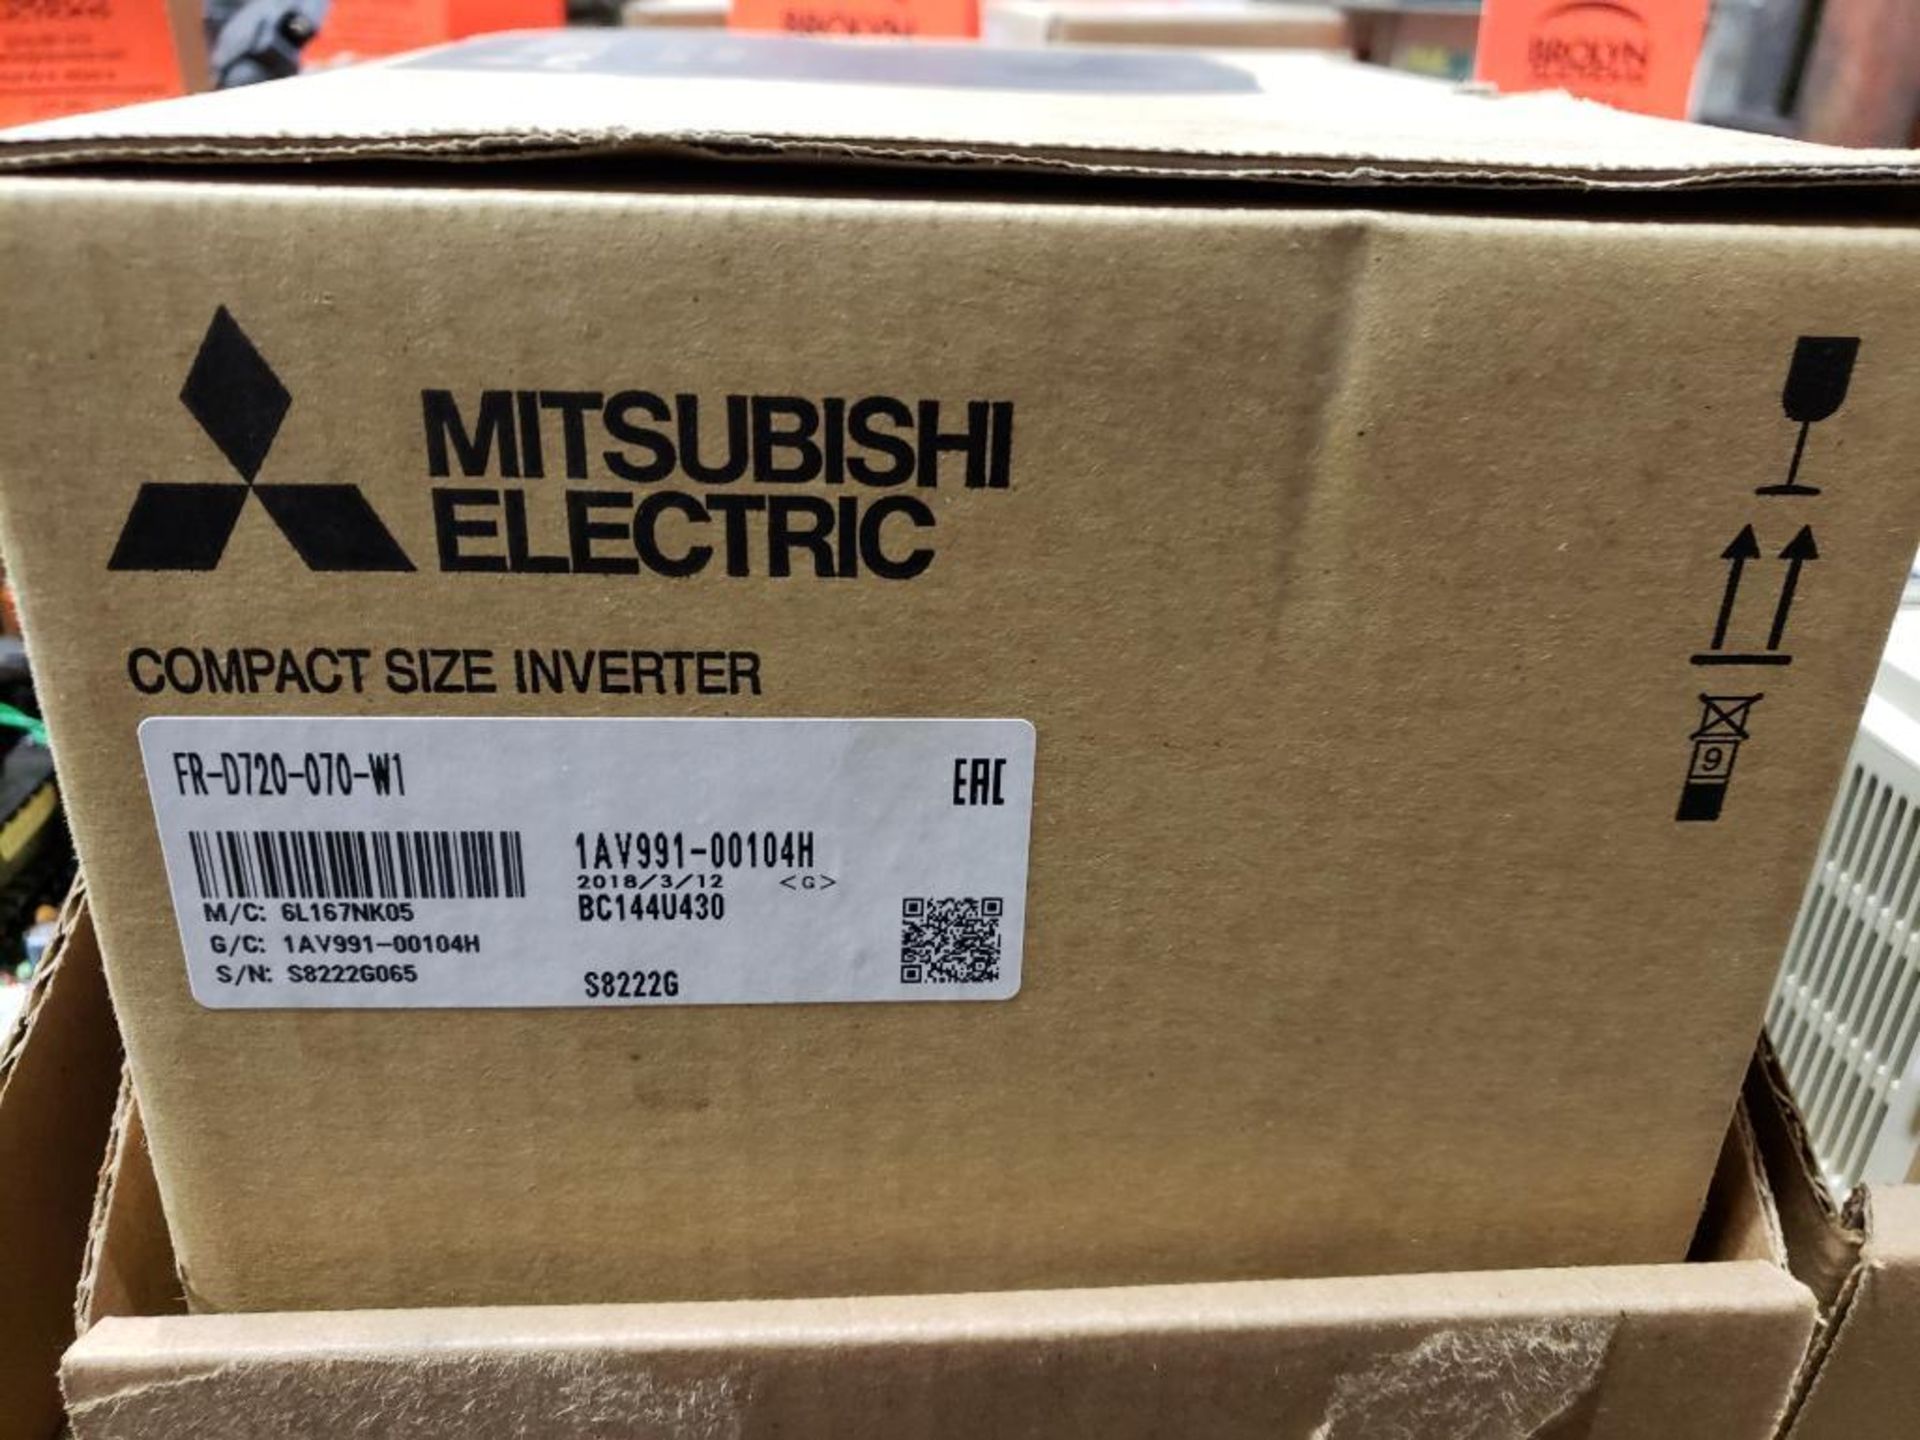 Mitsubishi Electric FR-D720-070-W1 compact size inverter. New in box. - Image 2 of 5